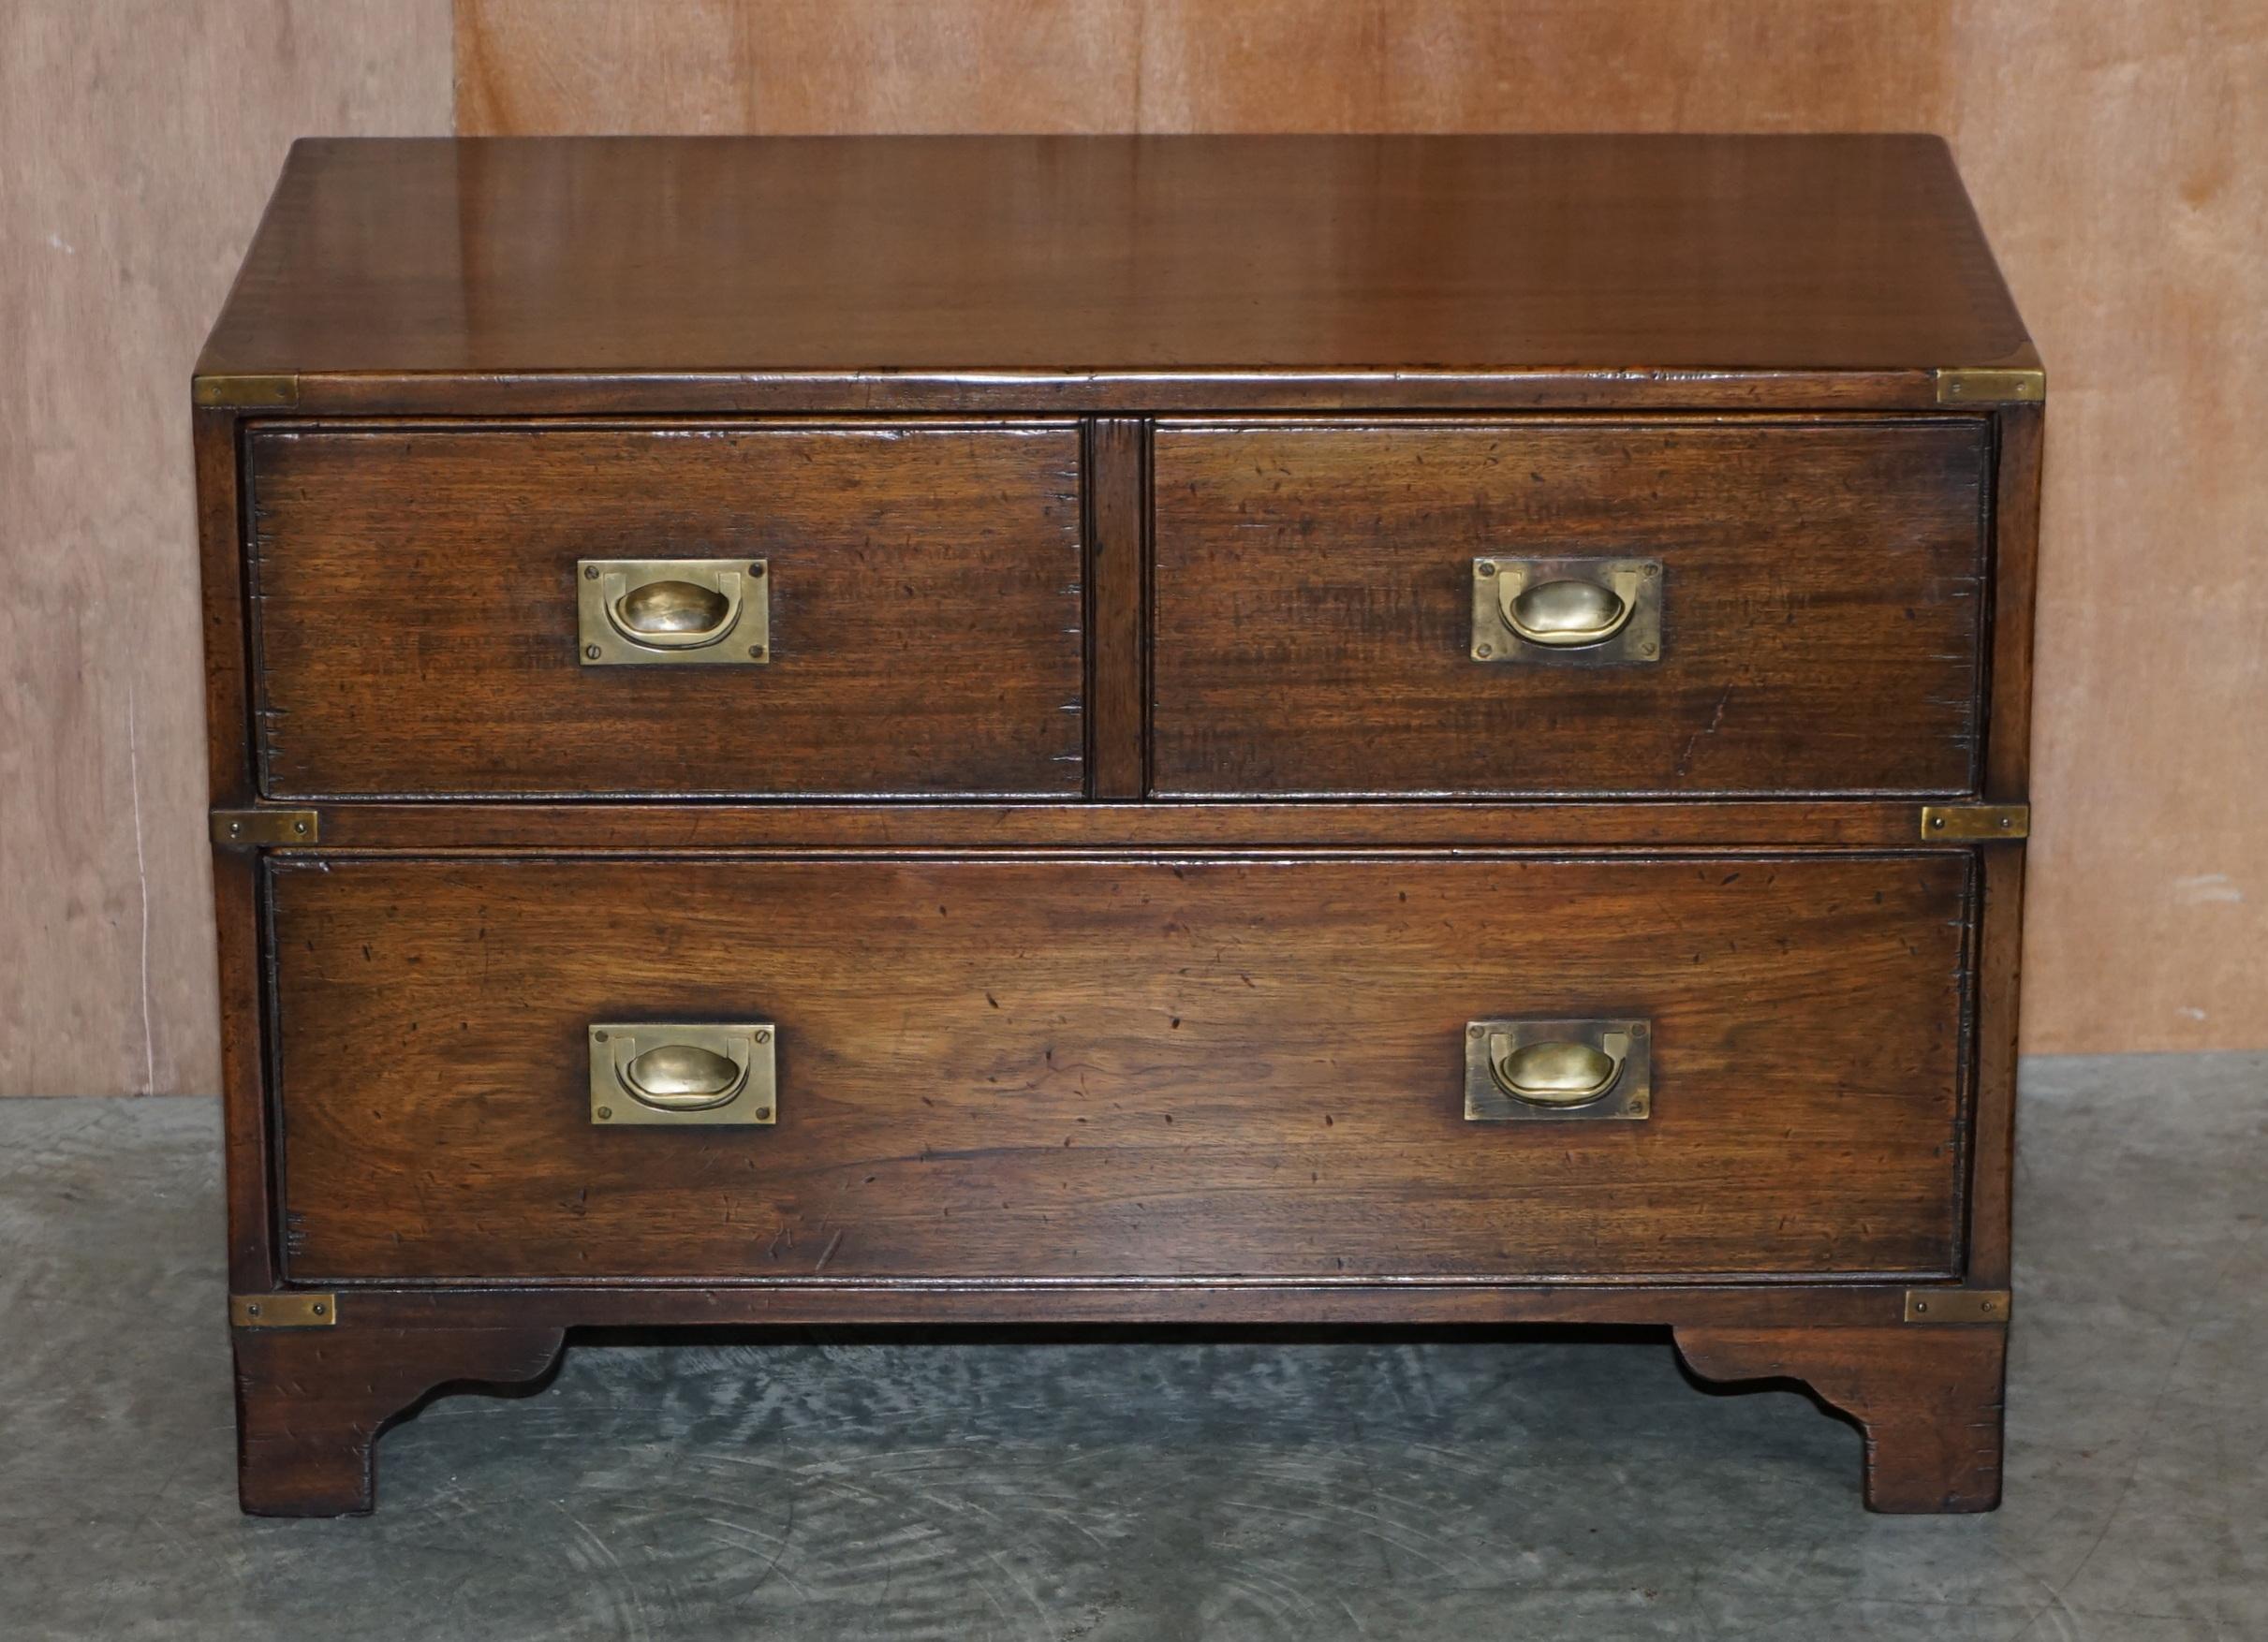 We are delighted to offer for this quite rare Harrods London REH Kennedy Mahogany military campaign chest of drawers

I have a matching one in Burr Yew wood listed under my other items

A very good looking well made and decorative piece, I’ve